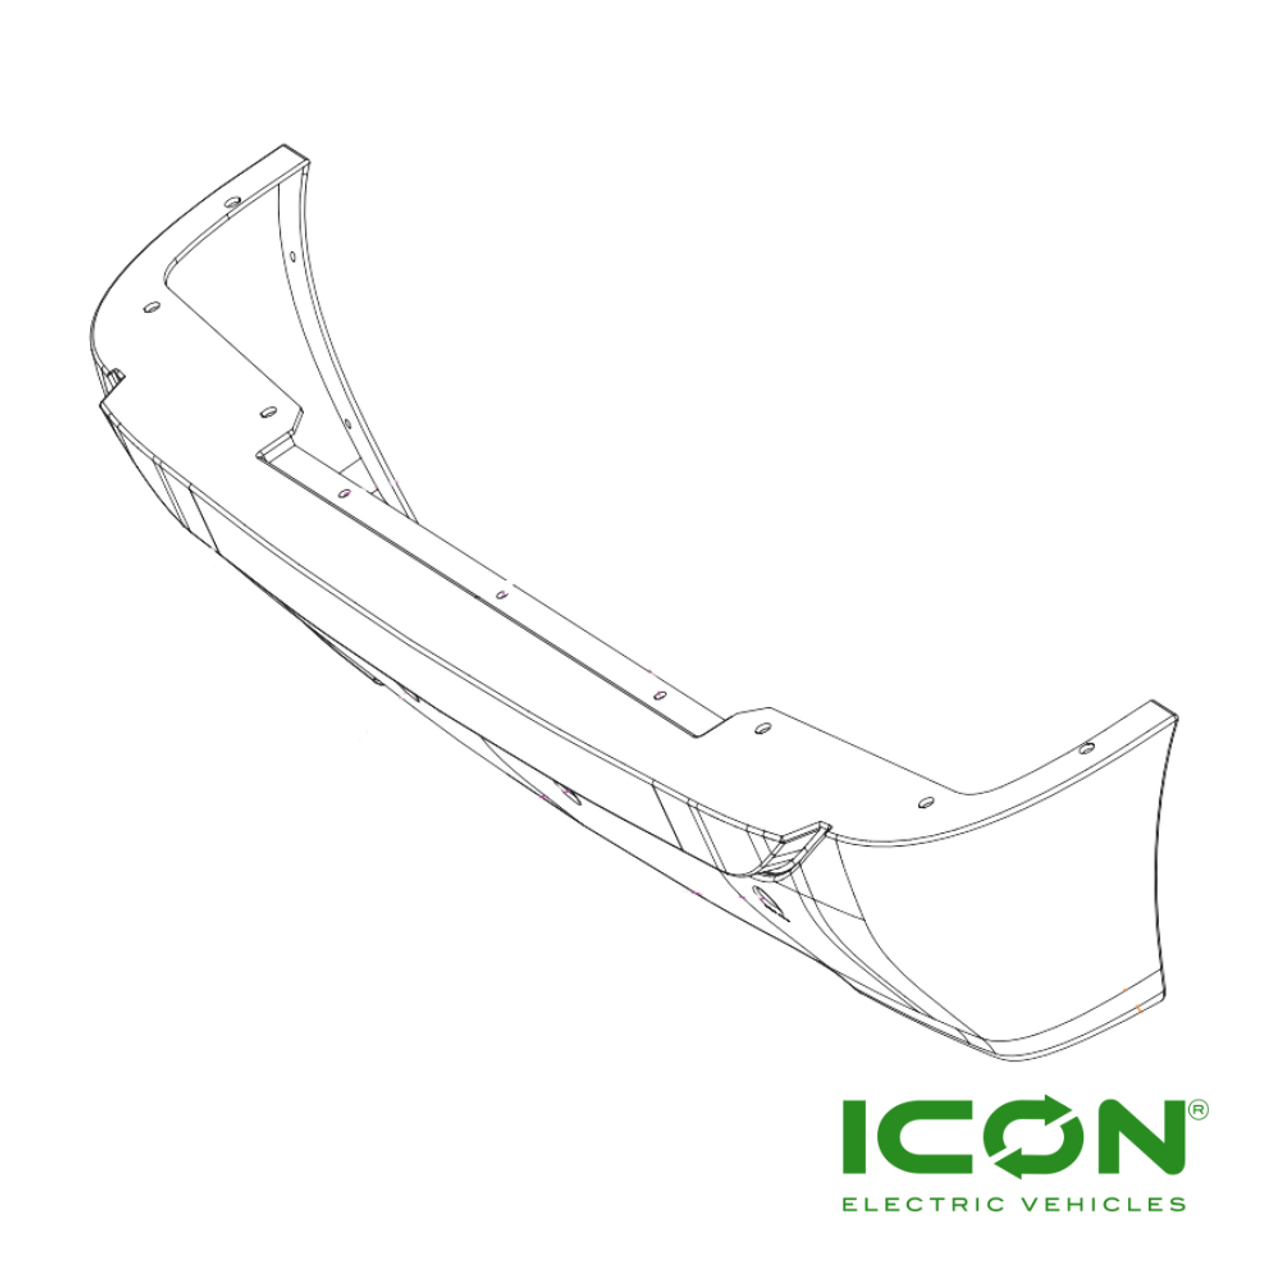 Lowered Rear Bumper for ICON Golf Carts, BD-740-IC, 3.02.011.300071, 3.201.16.010030